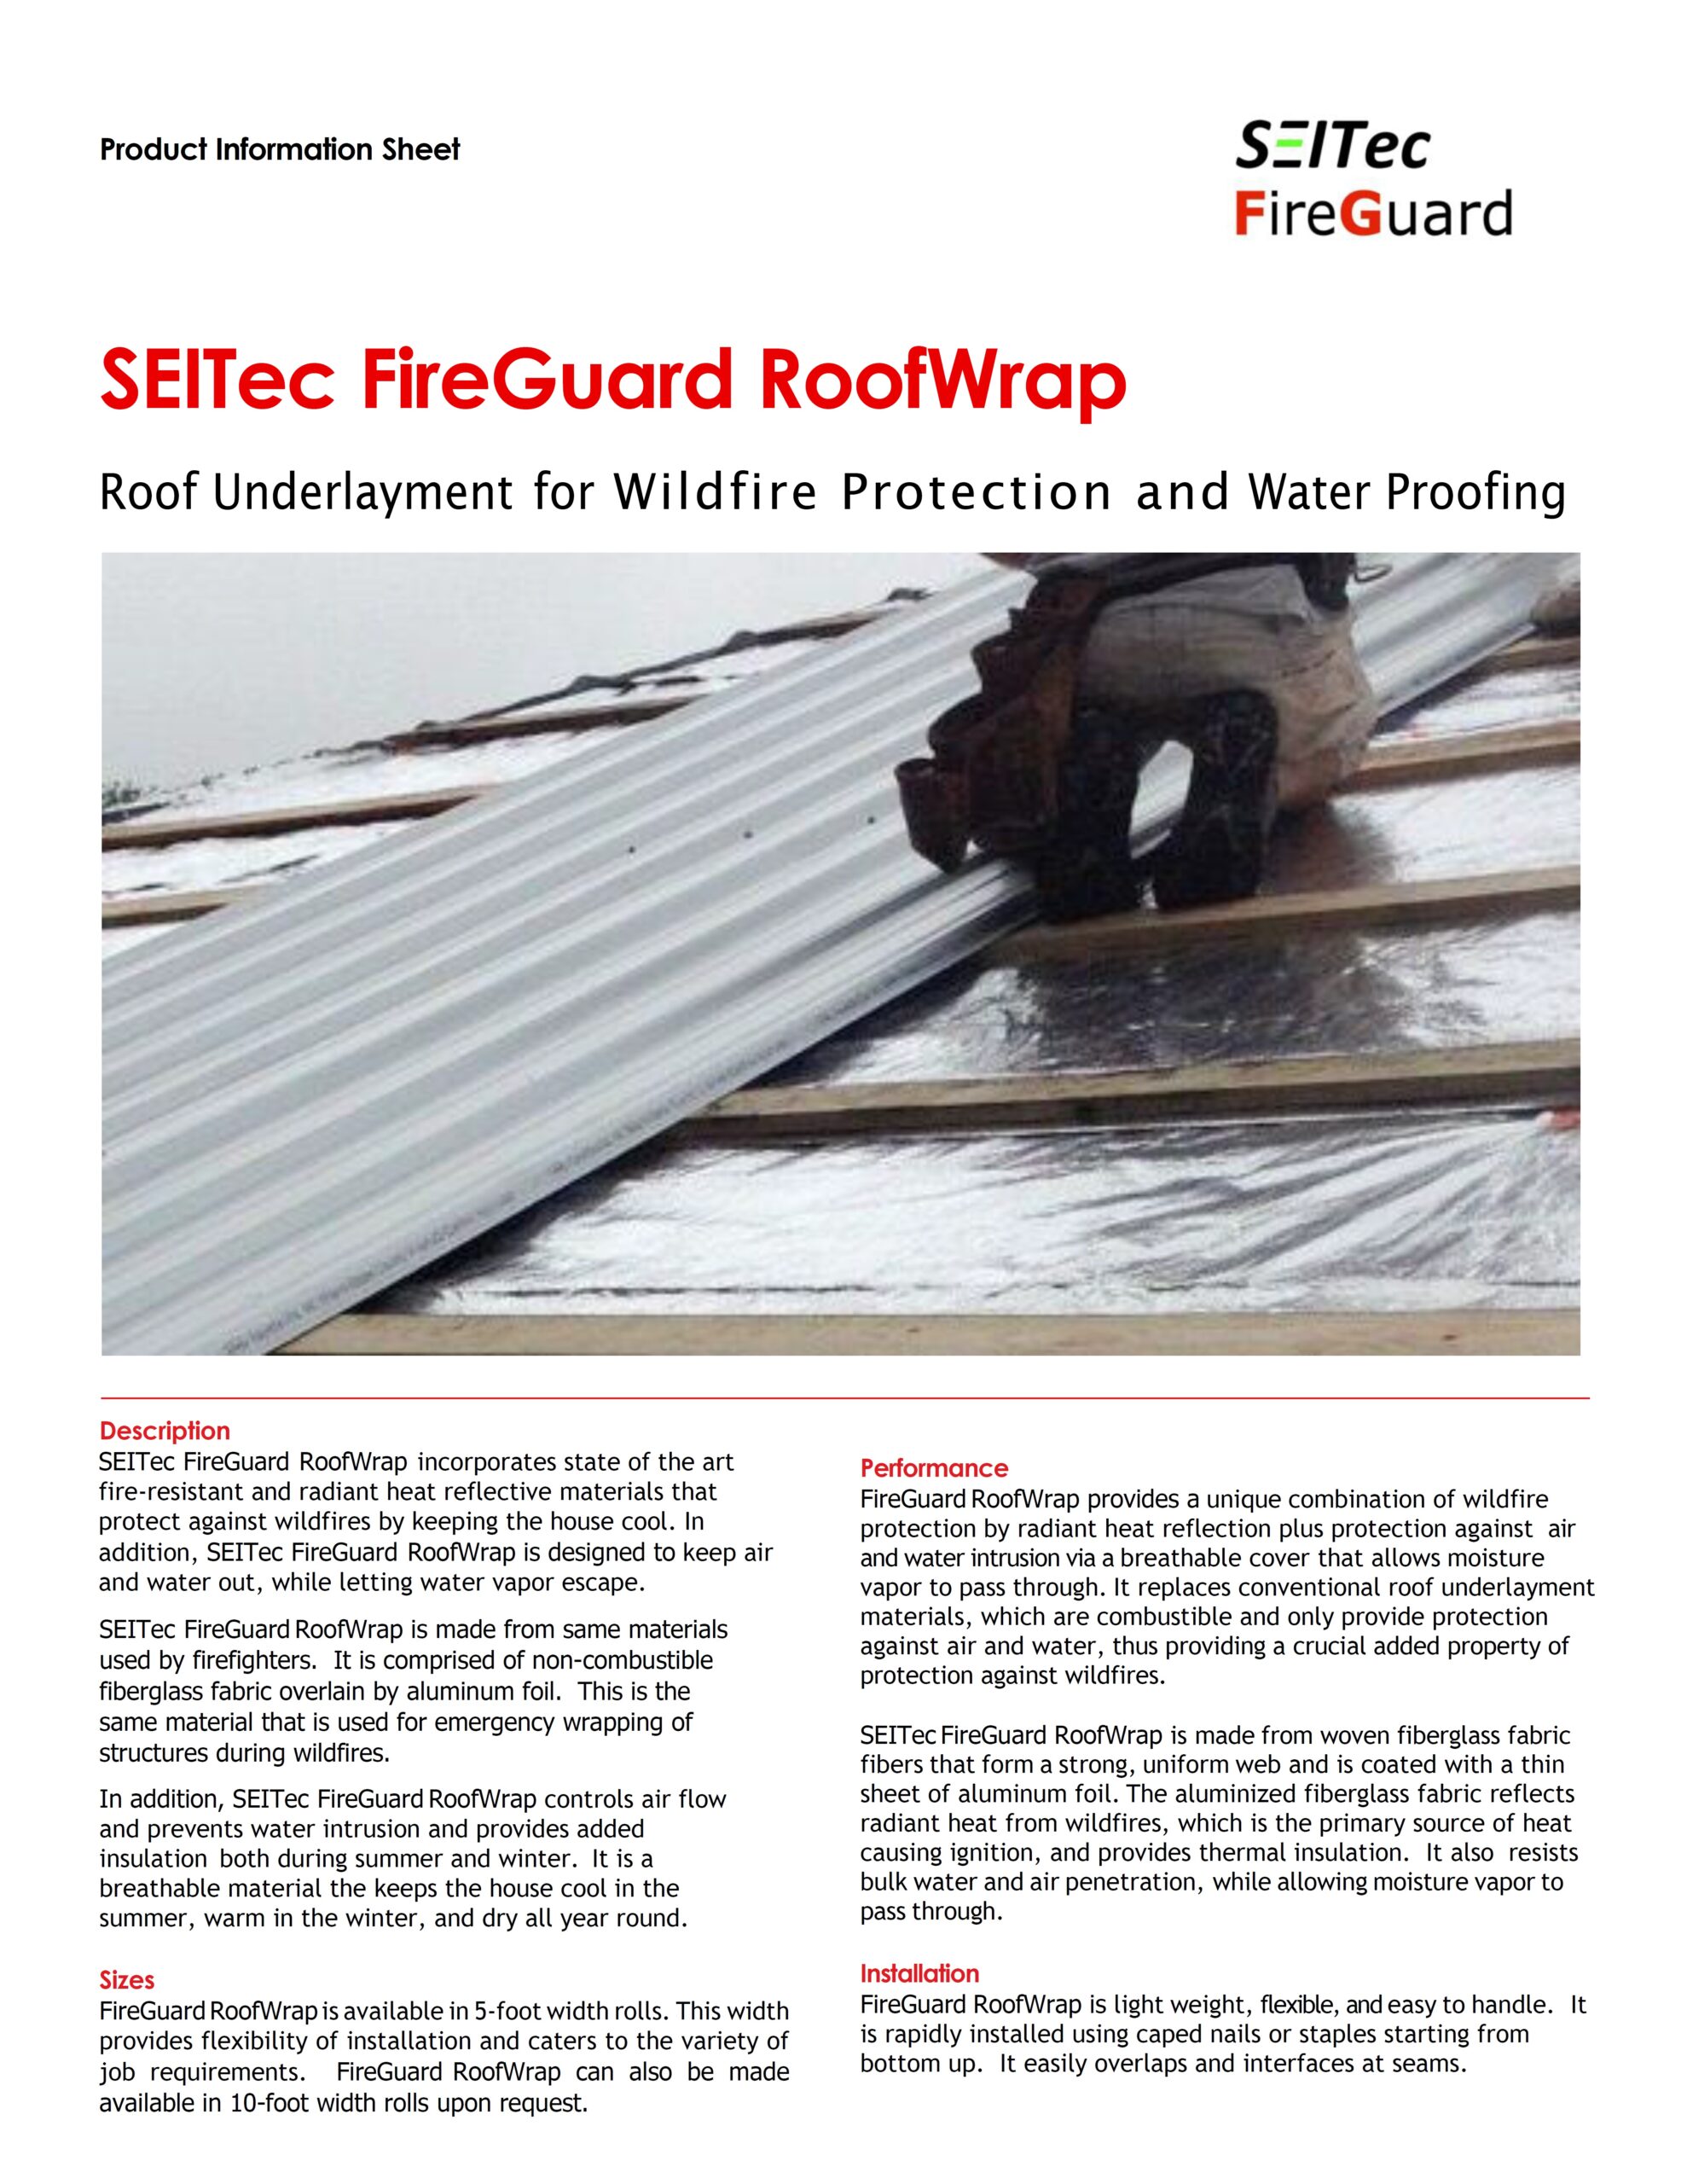 roof wrap for wildfire protection